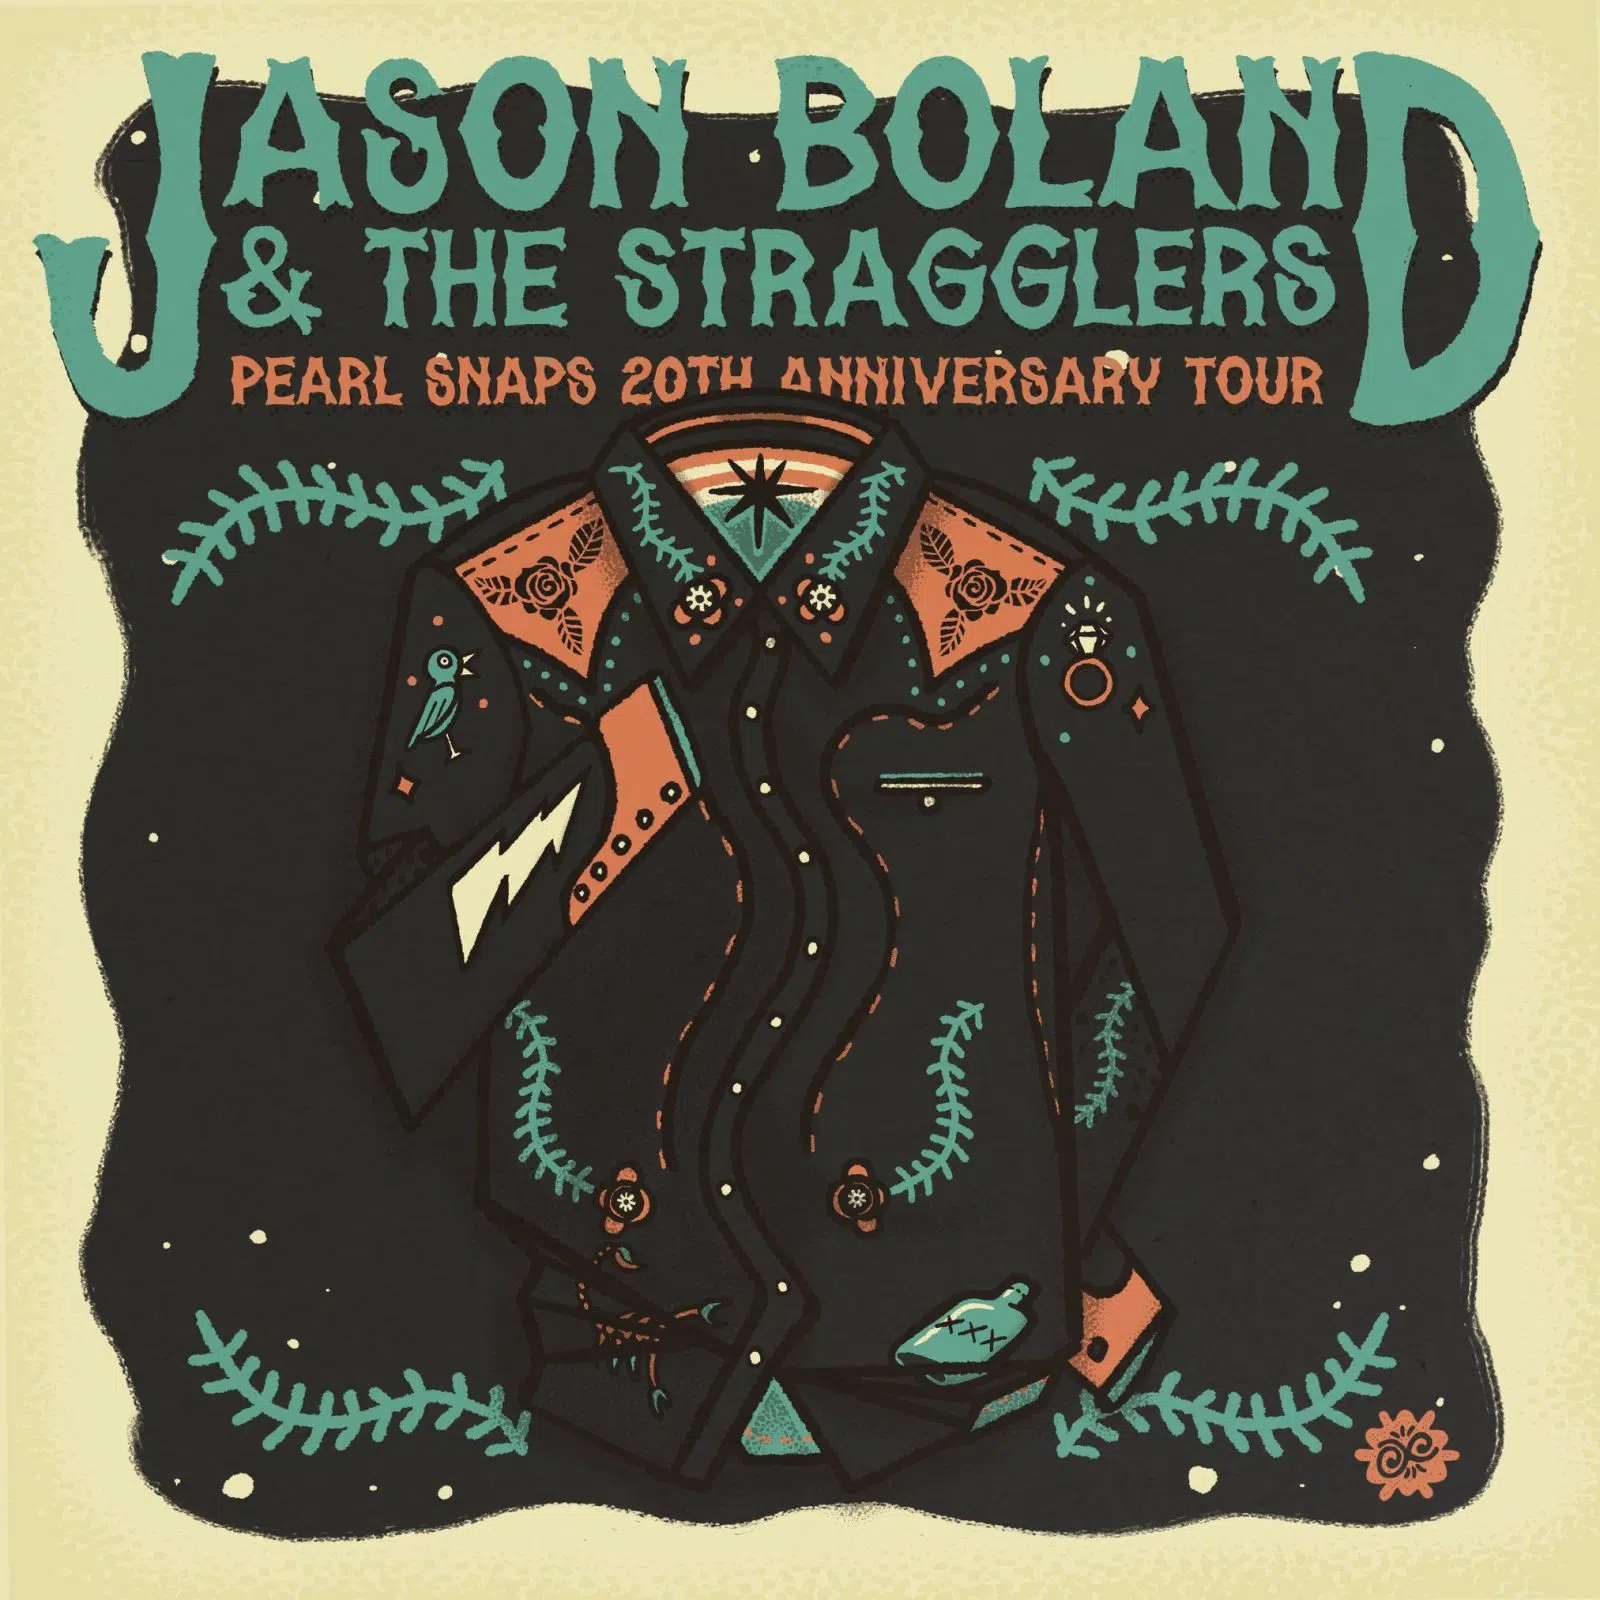 Jason Boland & The Stragglers Announce 20th Anniversary ‘Pearl Snaps